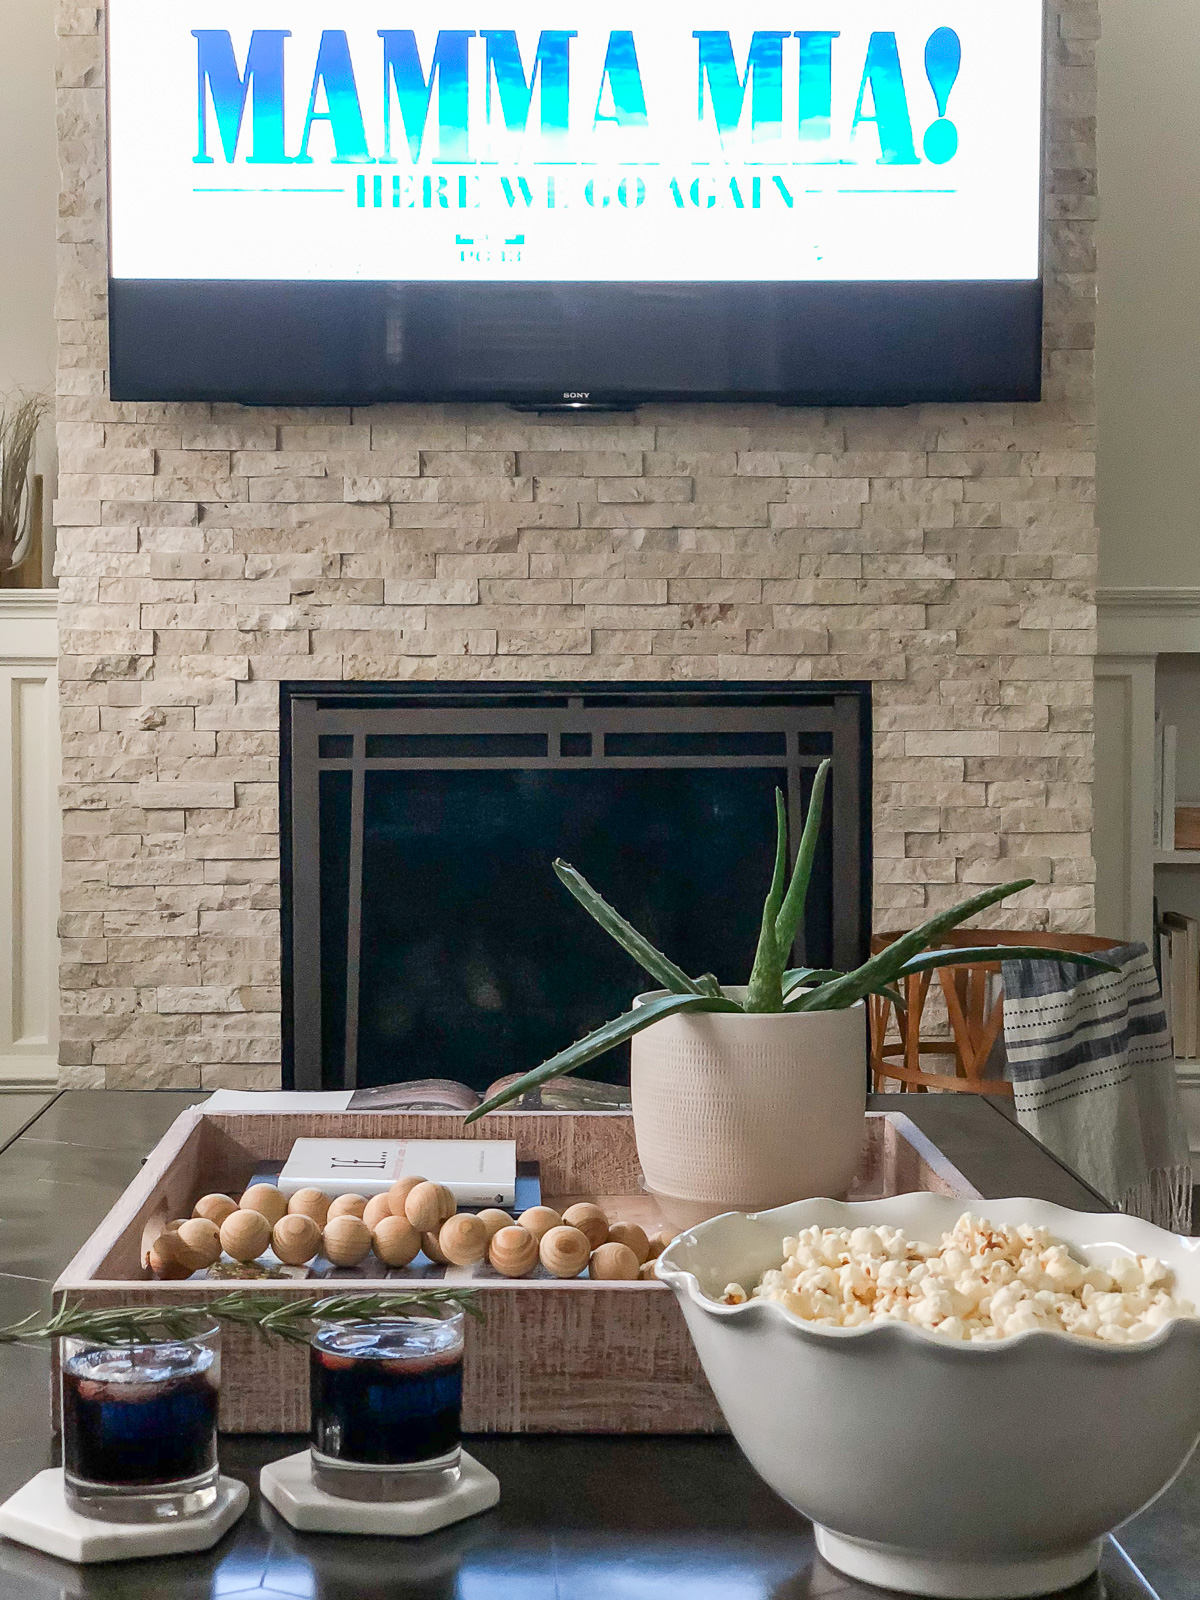 What better way to celebrate than to plan a Mamma Mia! Movie Night In with a healthy Greek inspired menu {AIP, Paleo, Whole 30} that’s easy to prepare!